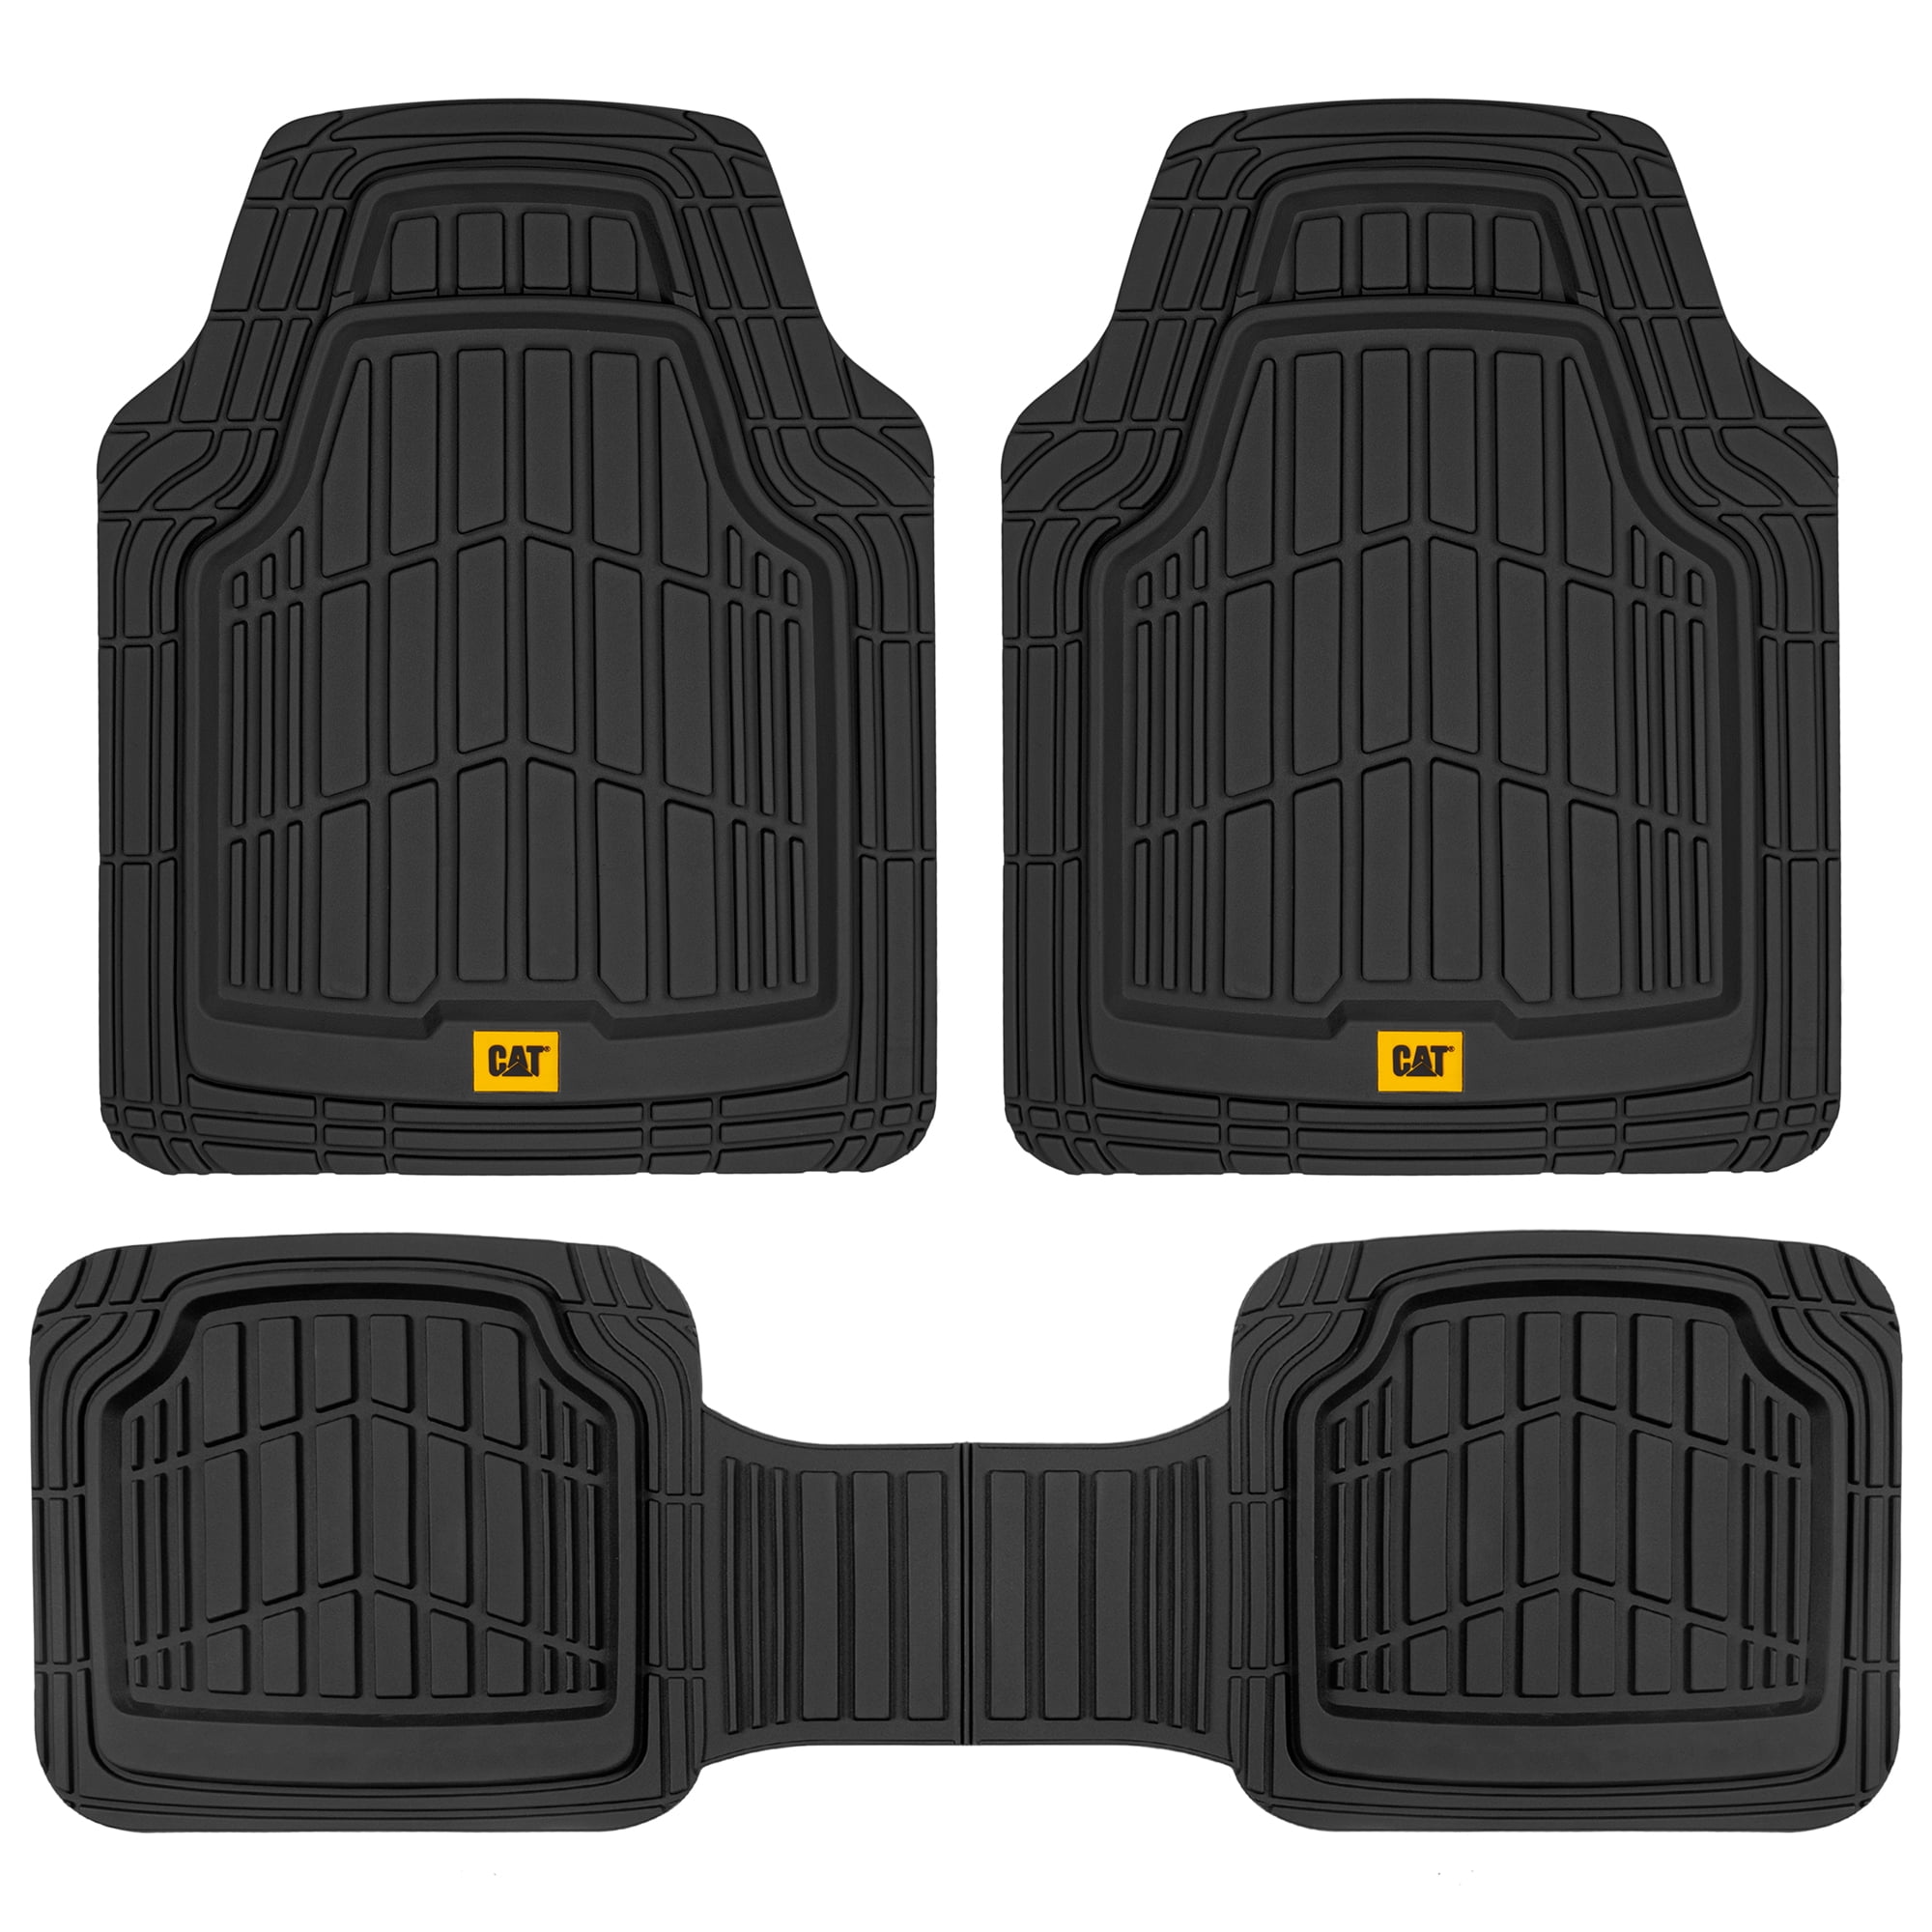 SUV Van PantsSaver Custom Fit Automotive Floor Mats for Chevrolet Express 2500 2018 All Weather Protection for Cars Trucks Heavy Duty Total Protection Gray 